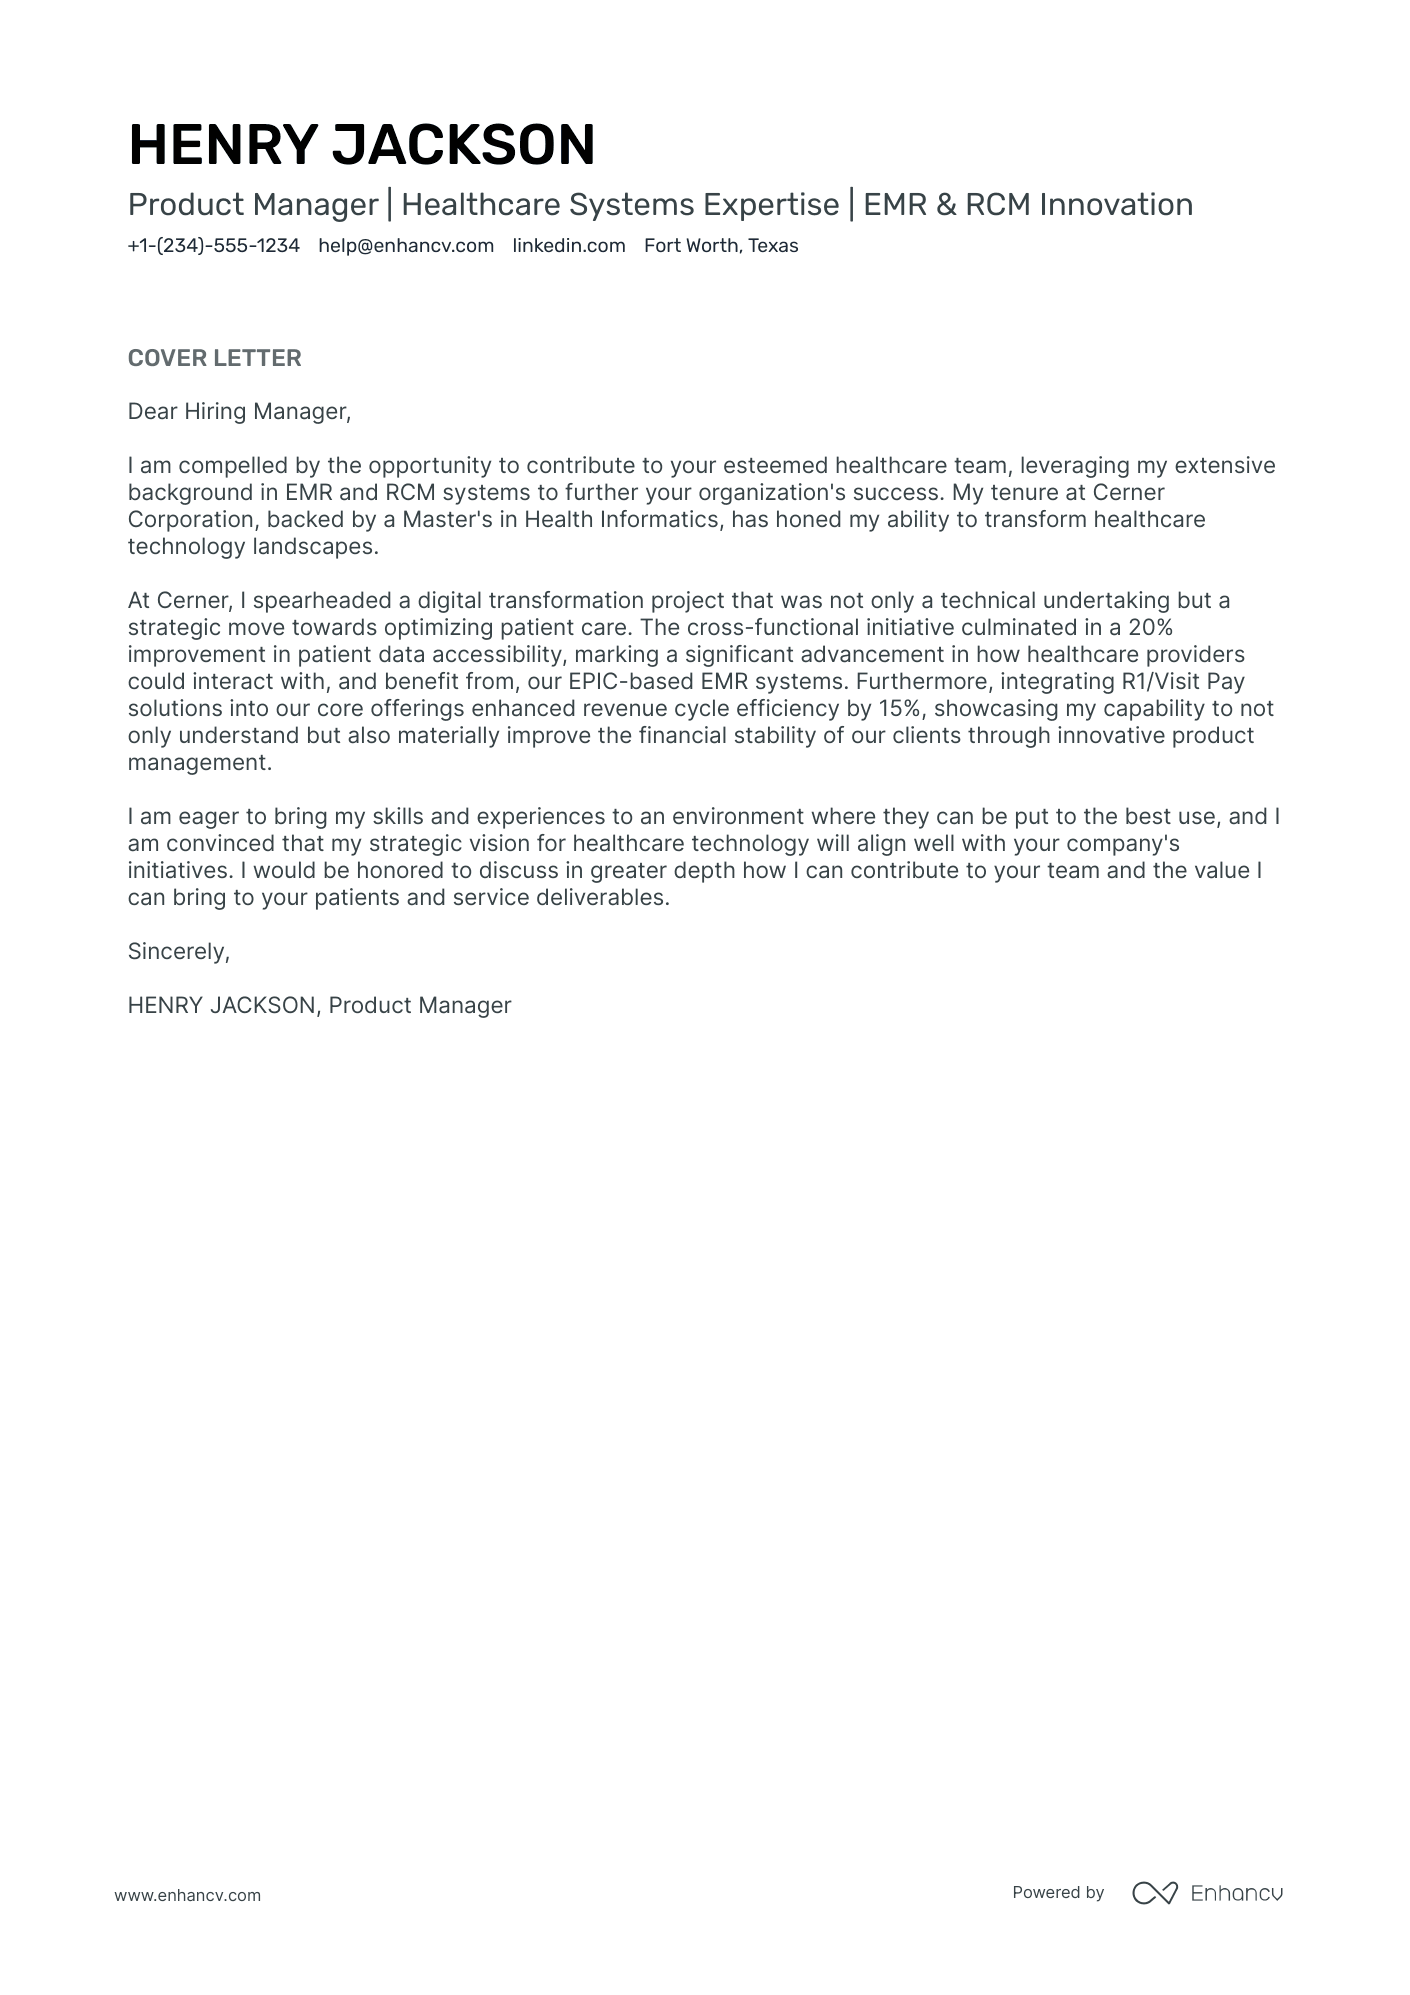 cover letter template for product manager